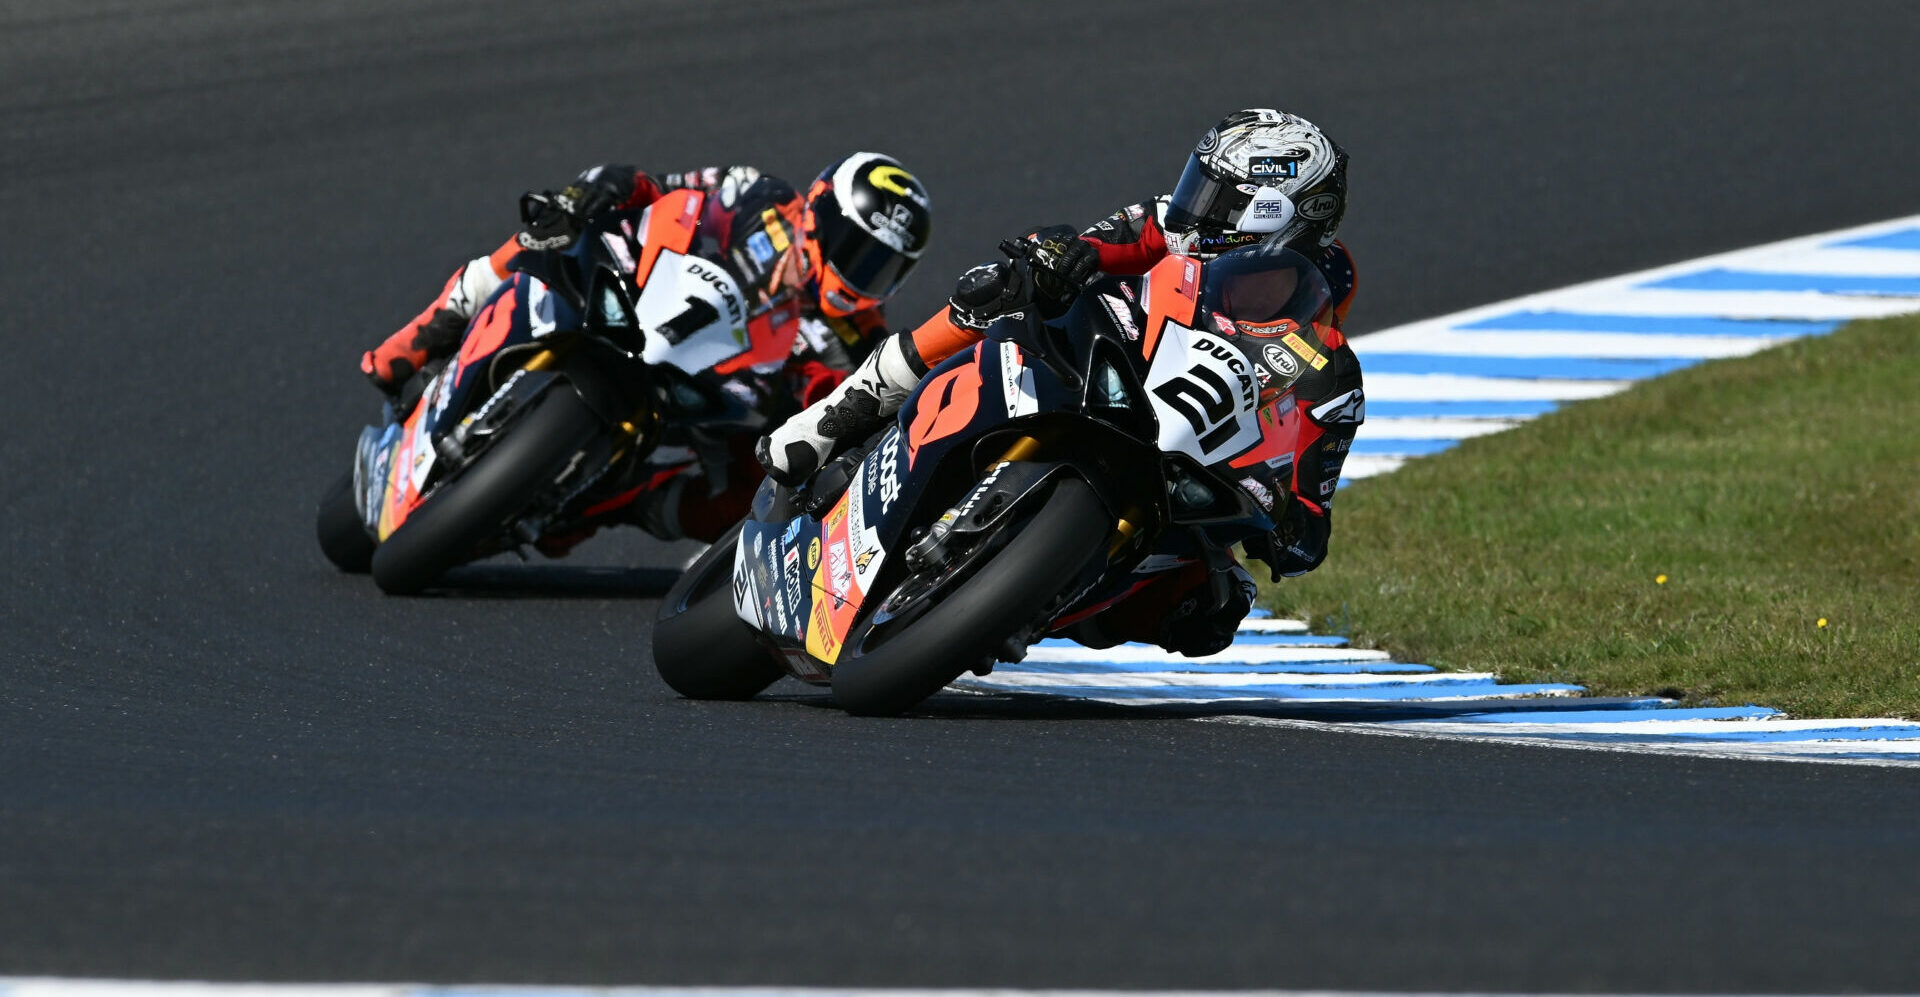 Josh Waters (21) looks back at Wayne Maxwell (1) during a race on Sunday at Phillip Island. Photo courtesy ASBK.